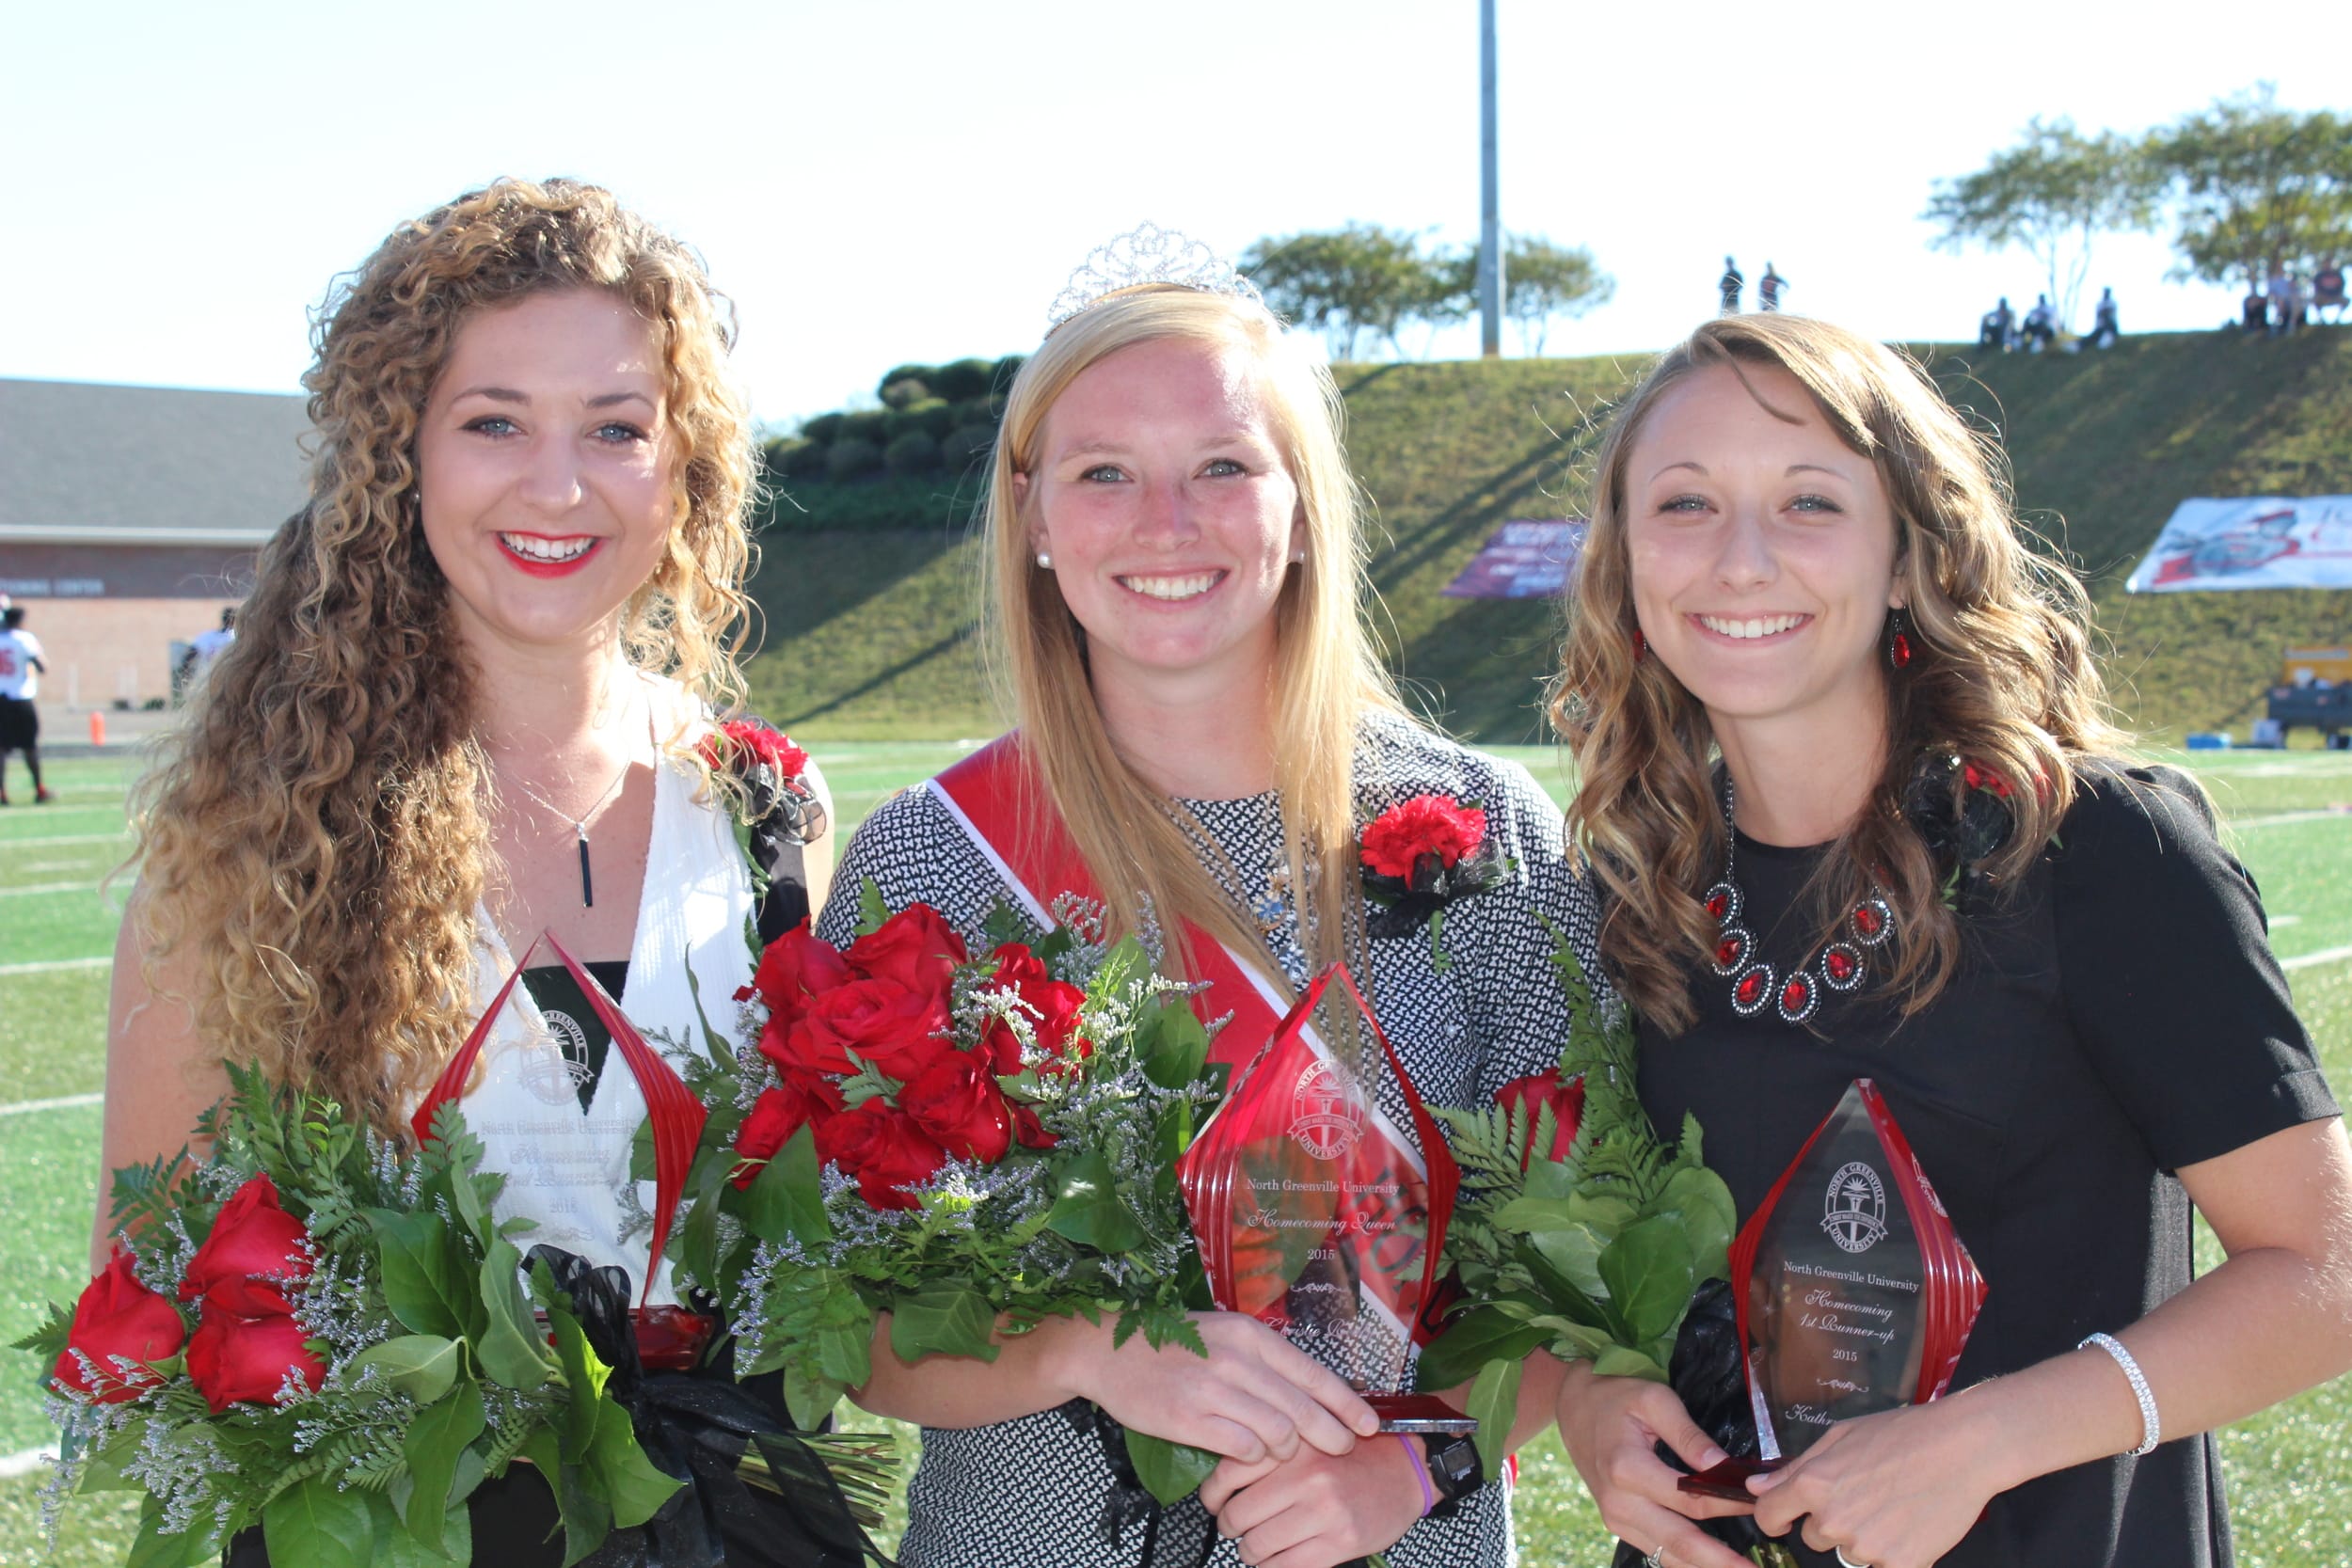  The homecoming queen and runner-ups posed for a photo after the event. The photo features Anna Shoop, Christie Reilly and Kathryn Allen. 